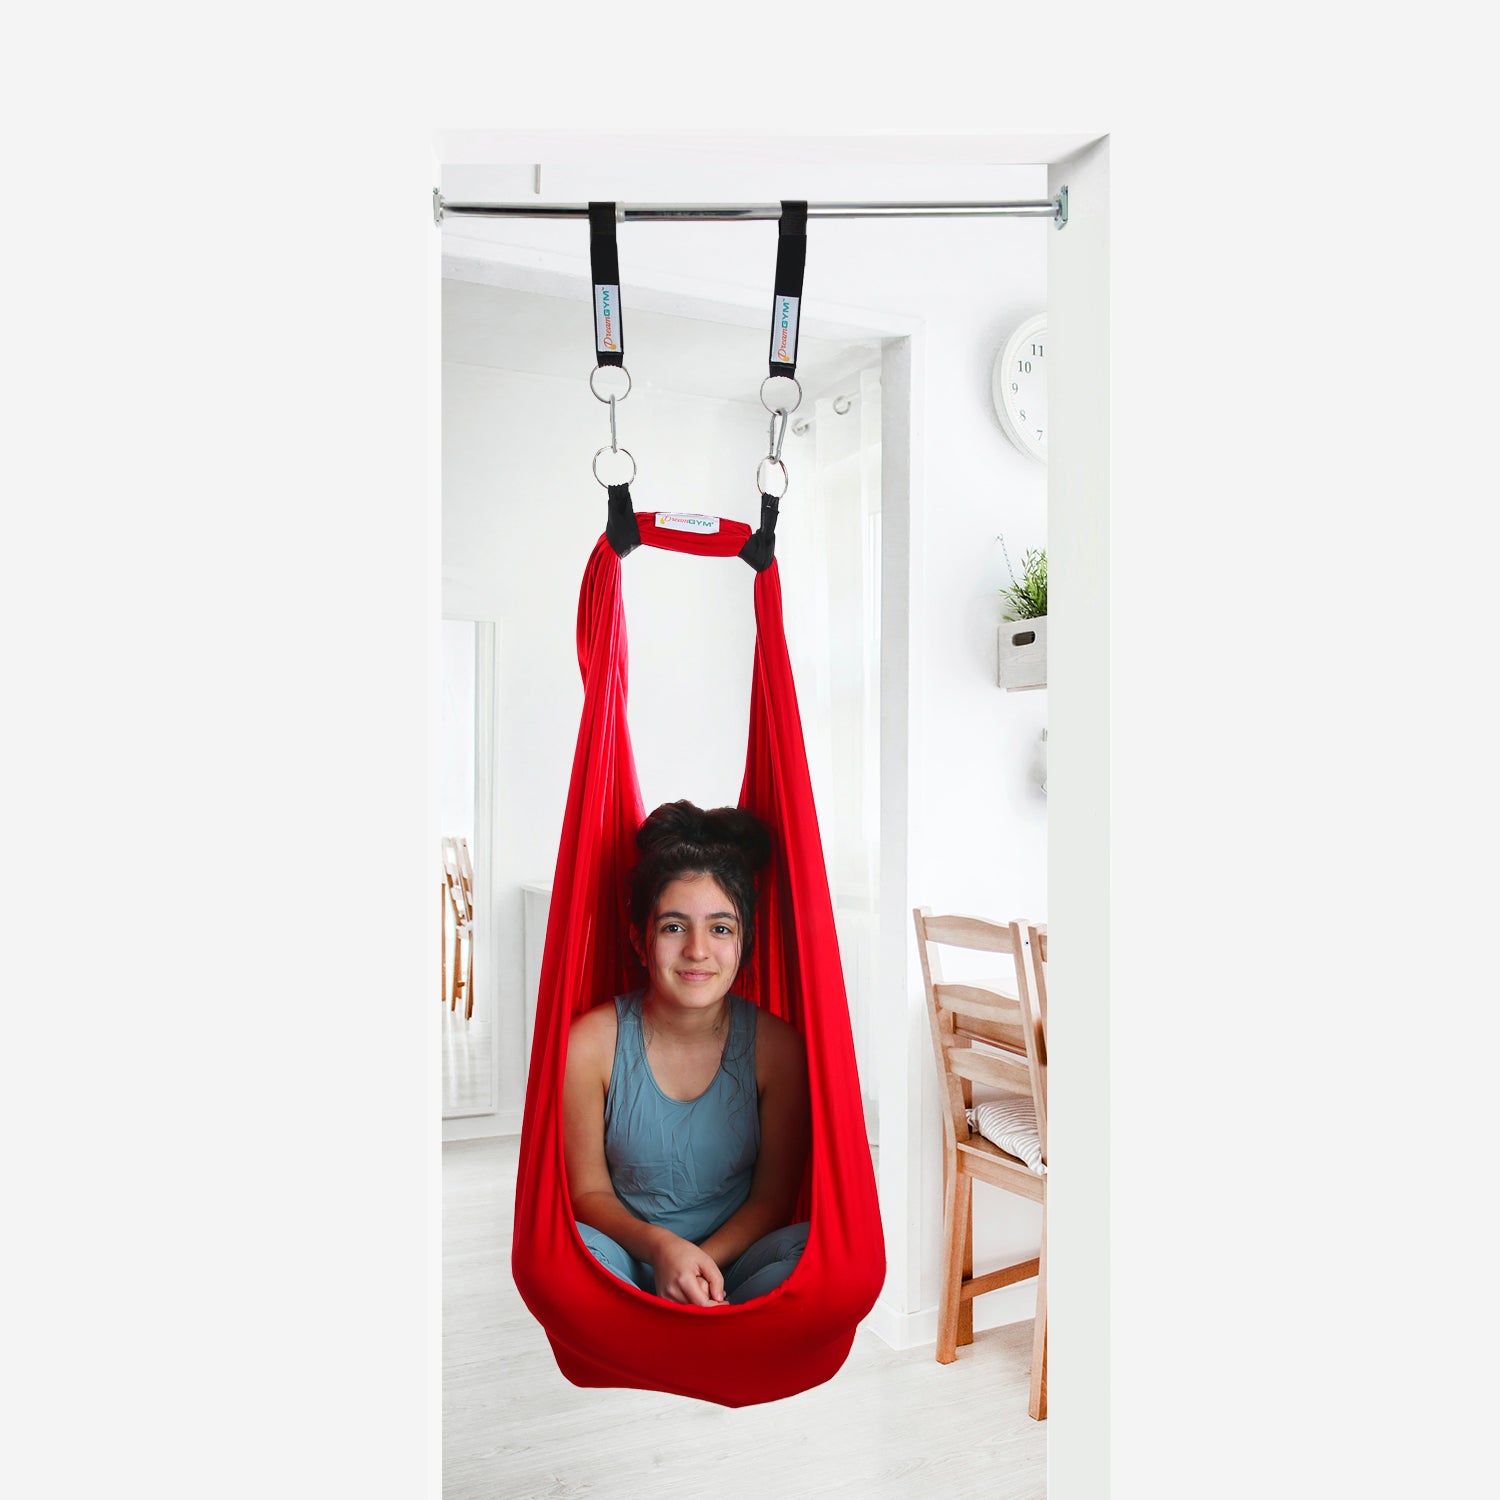 A teen girl is sitting in a doorway sensory swing in red colour